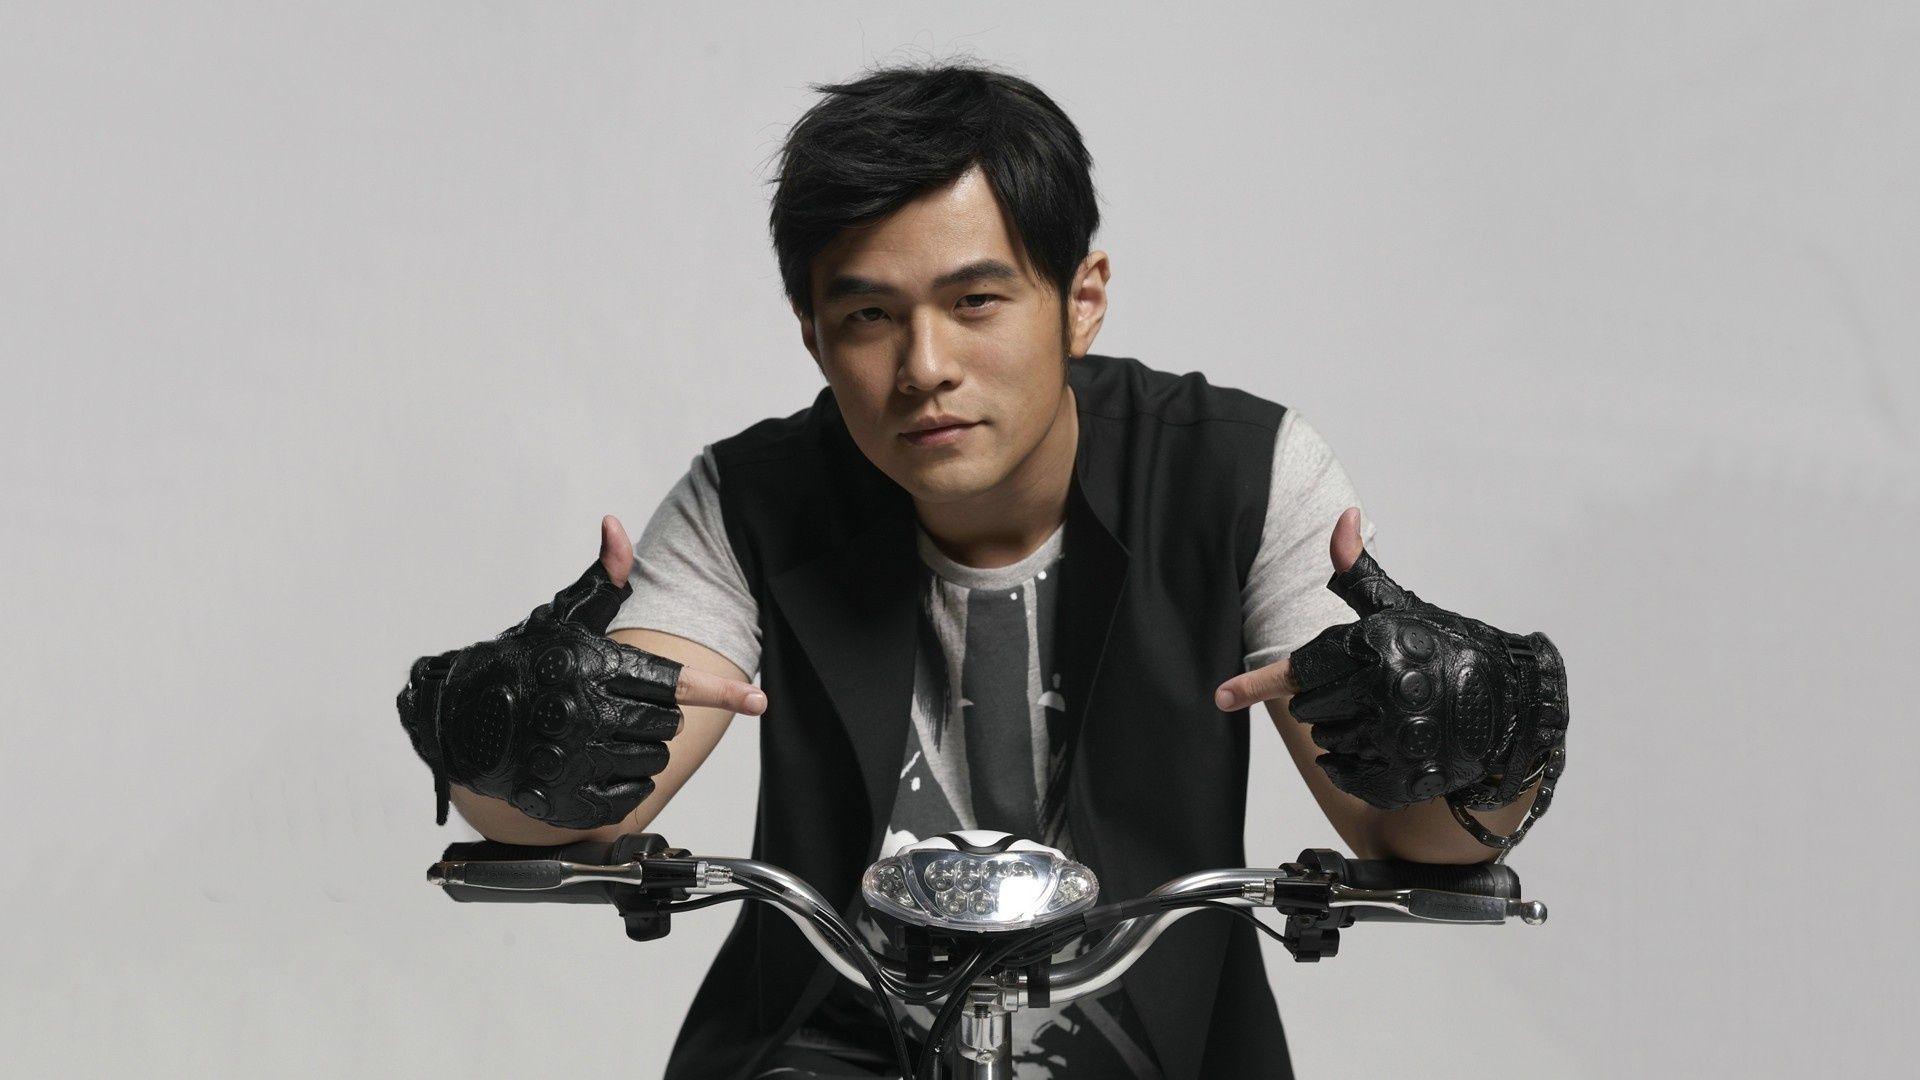 Jay Chou, Moped, Jay Chou Moped Wallpaper and Picture